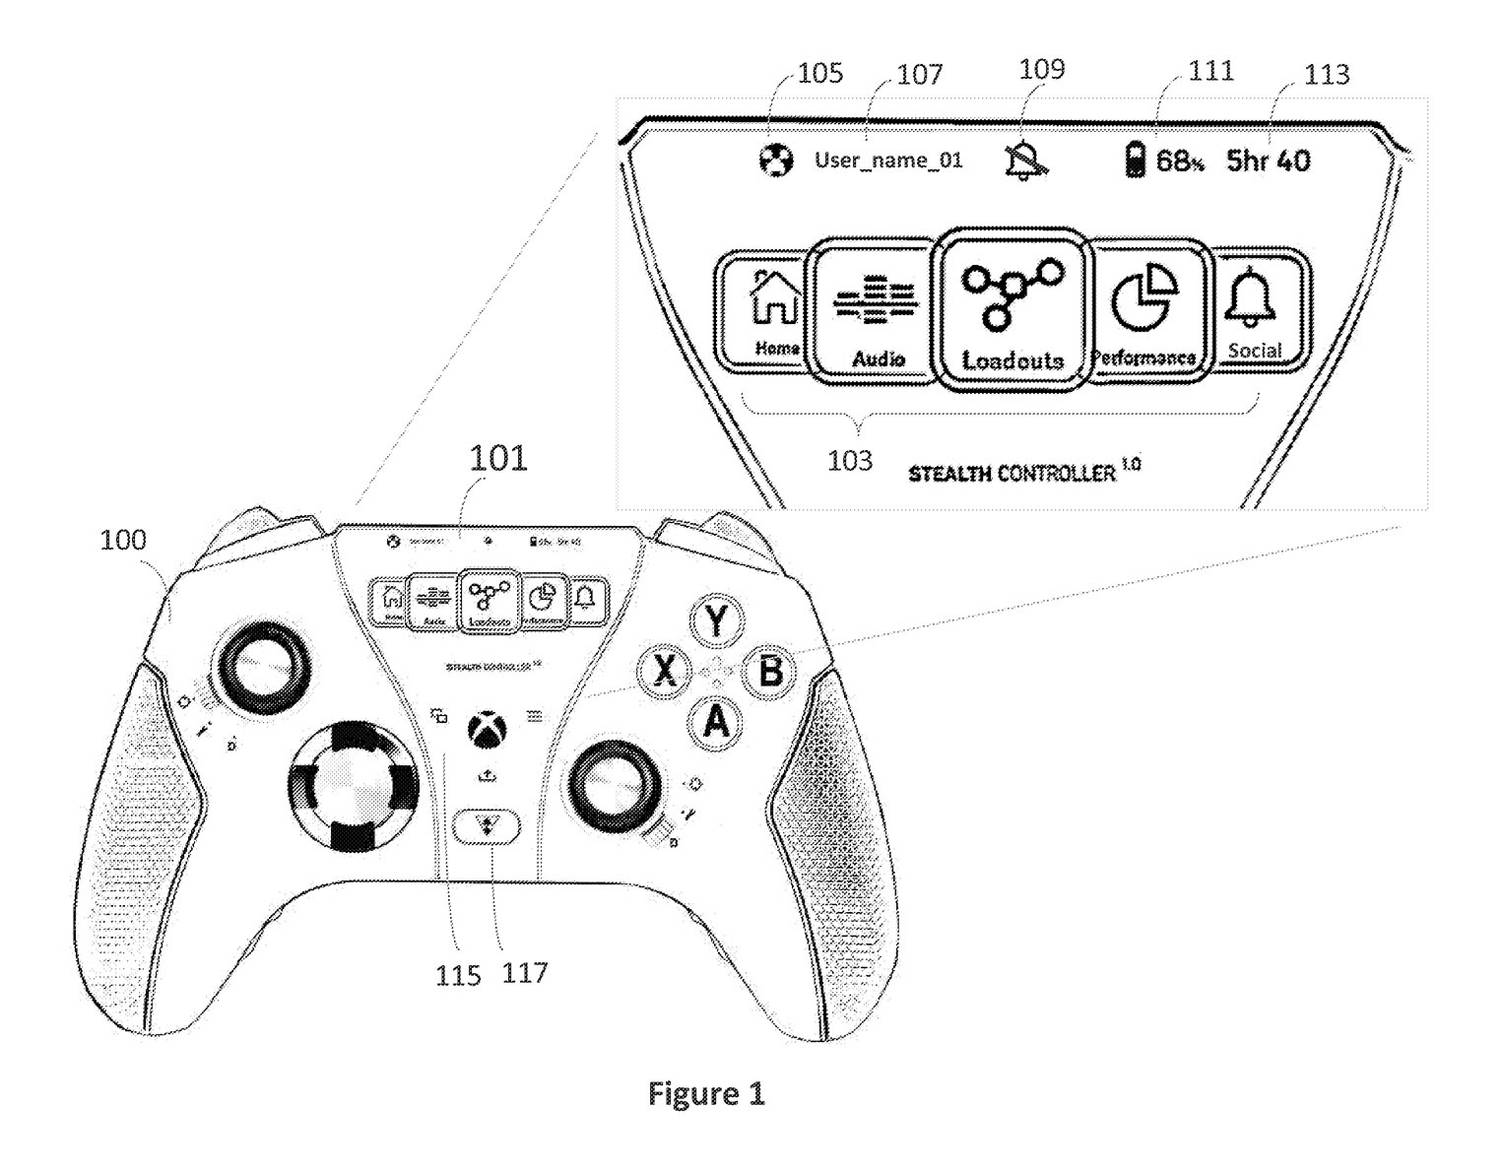 xbox-controller-patent-store-loadouts.jpg